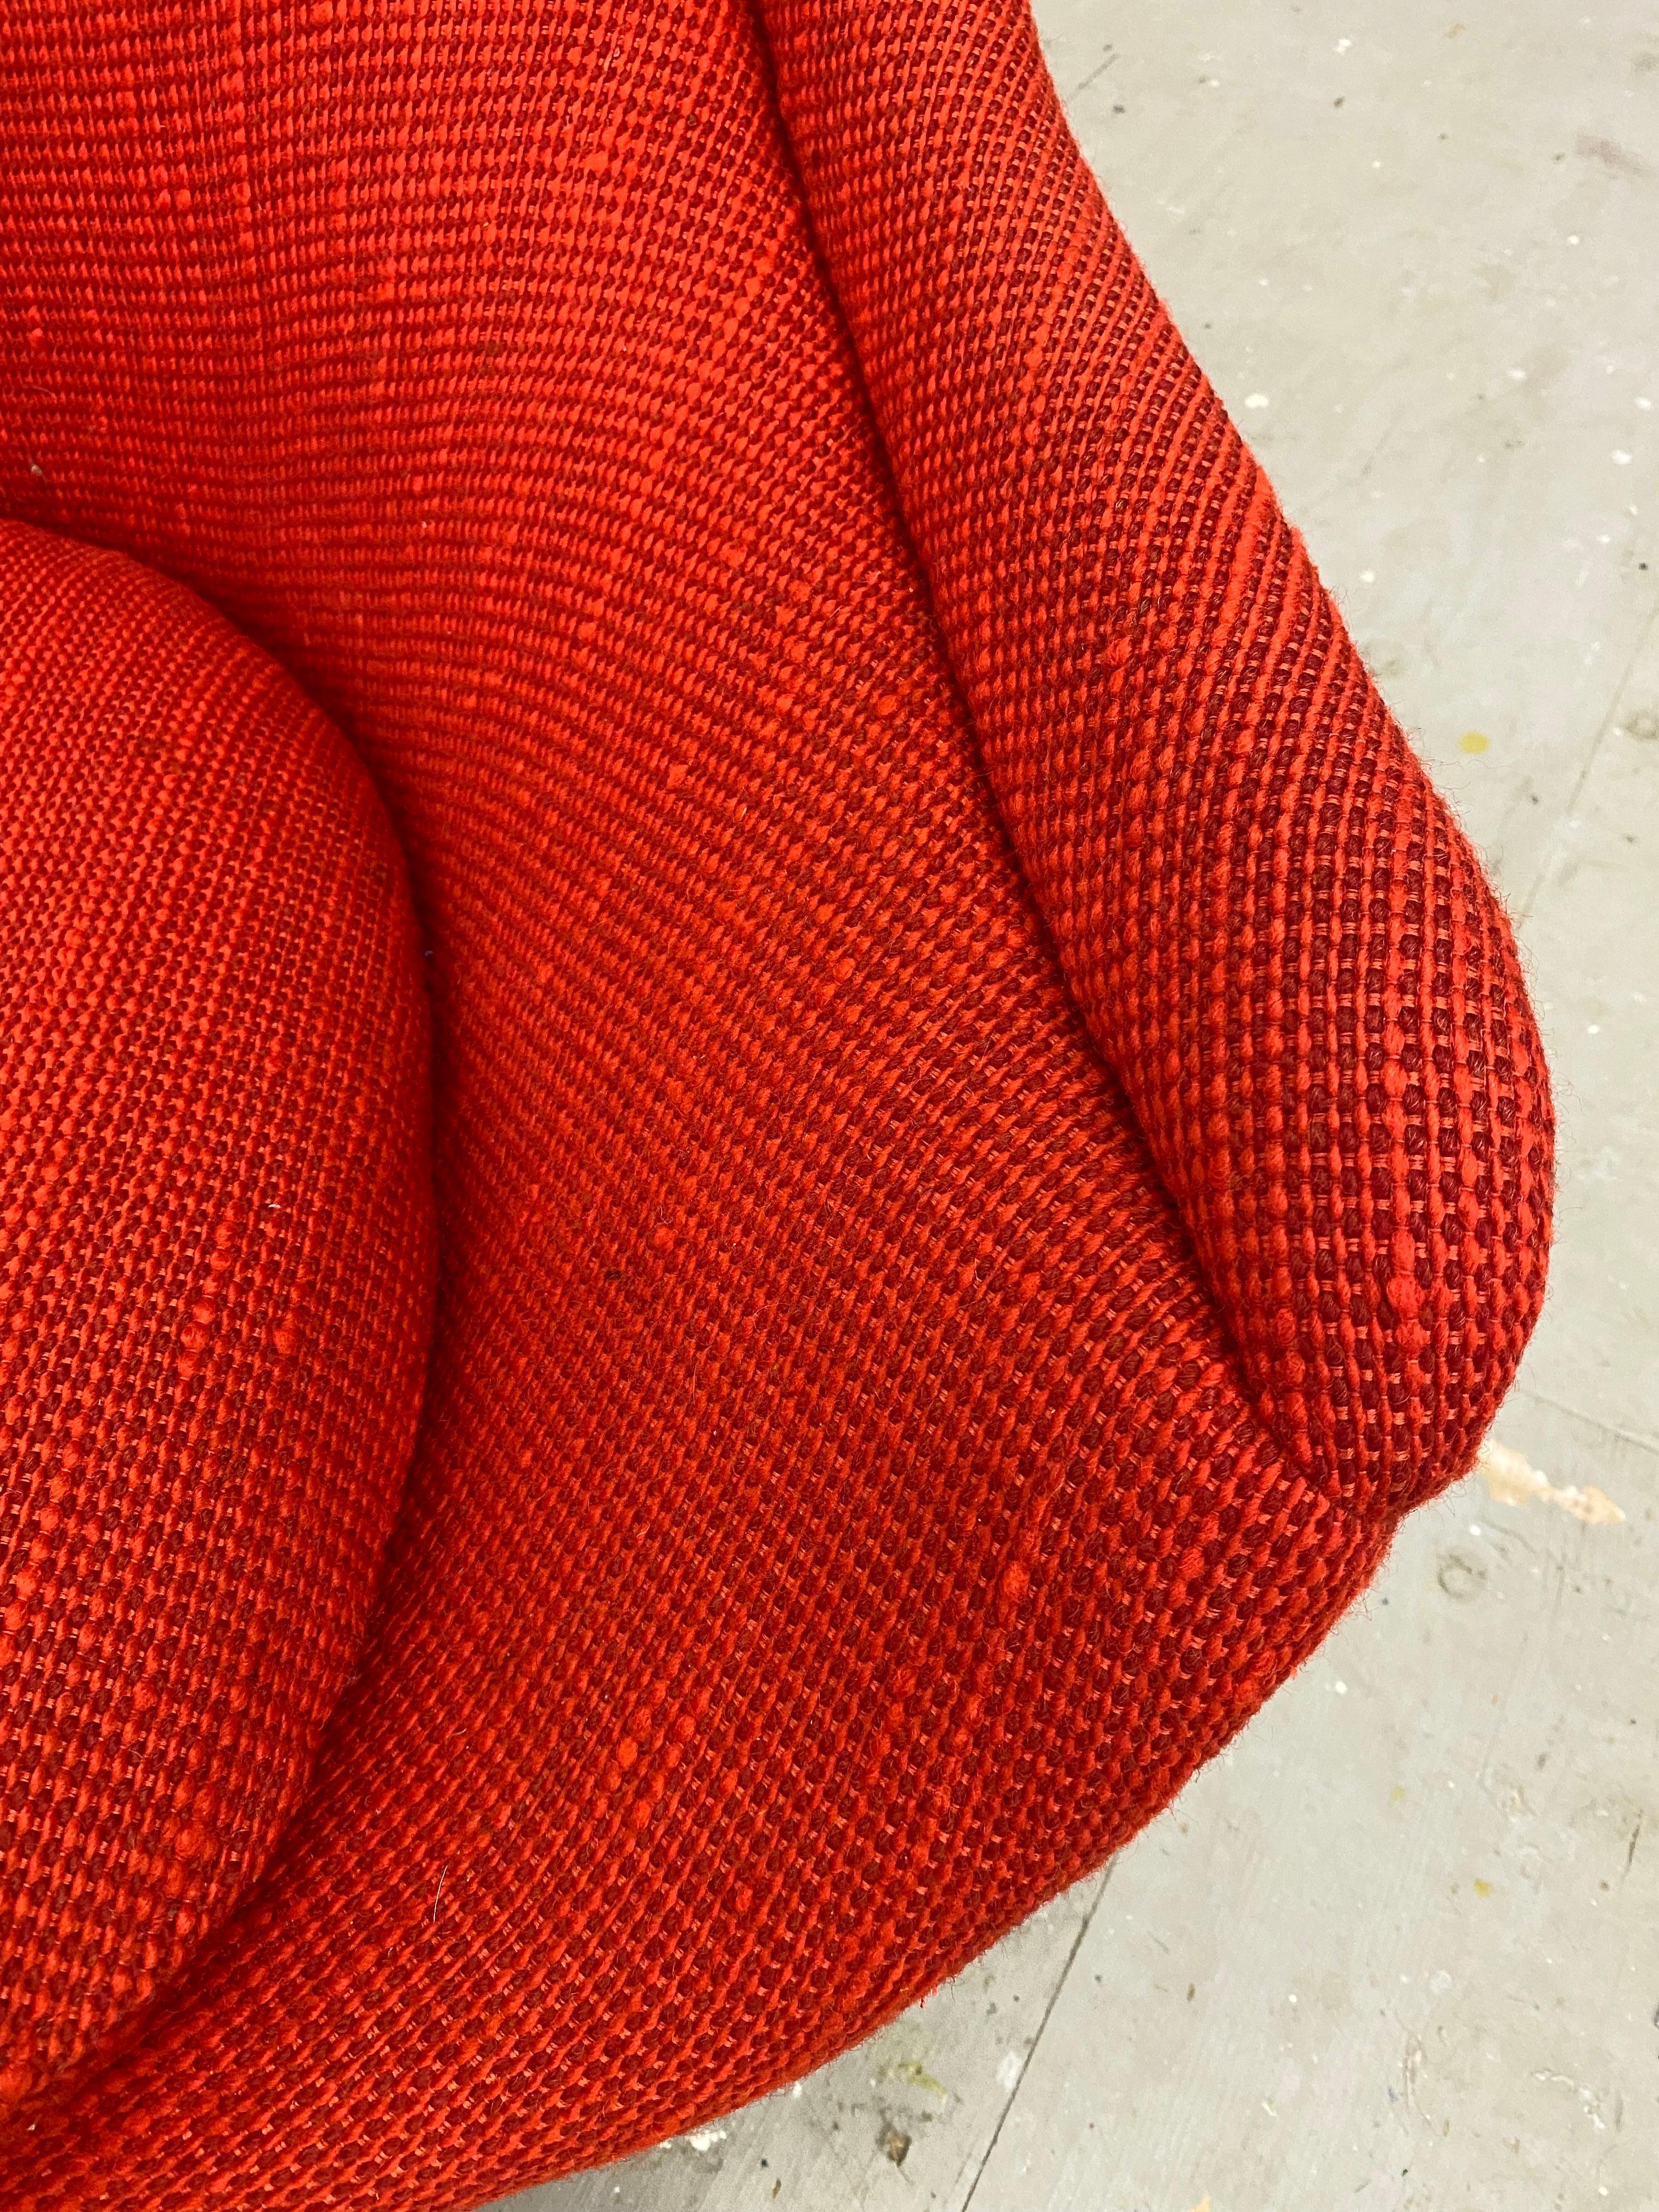 Warren Platner Easy Lounge Chair and Ottoman in Original Cado Red Fabric/ 1970 6